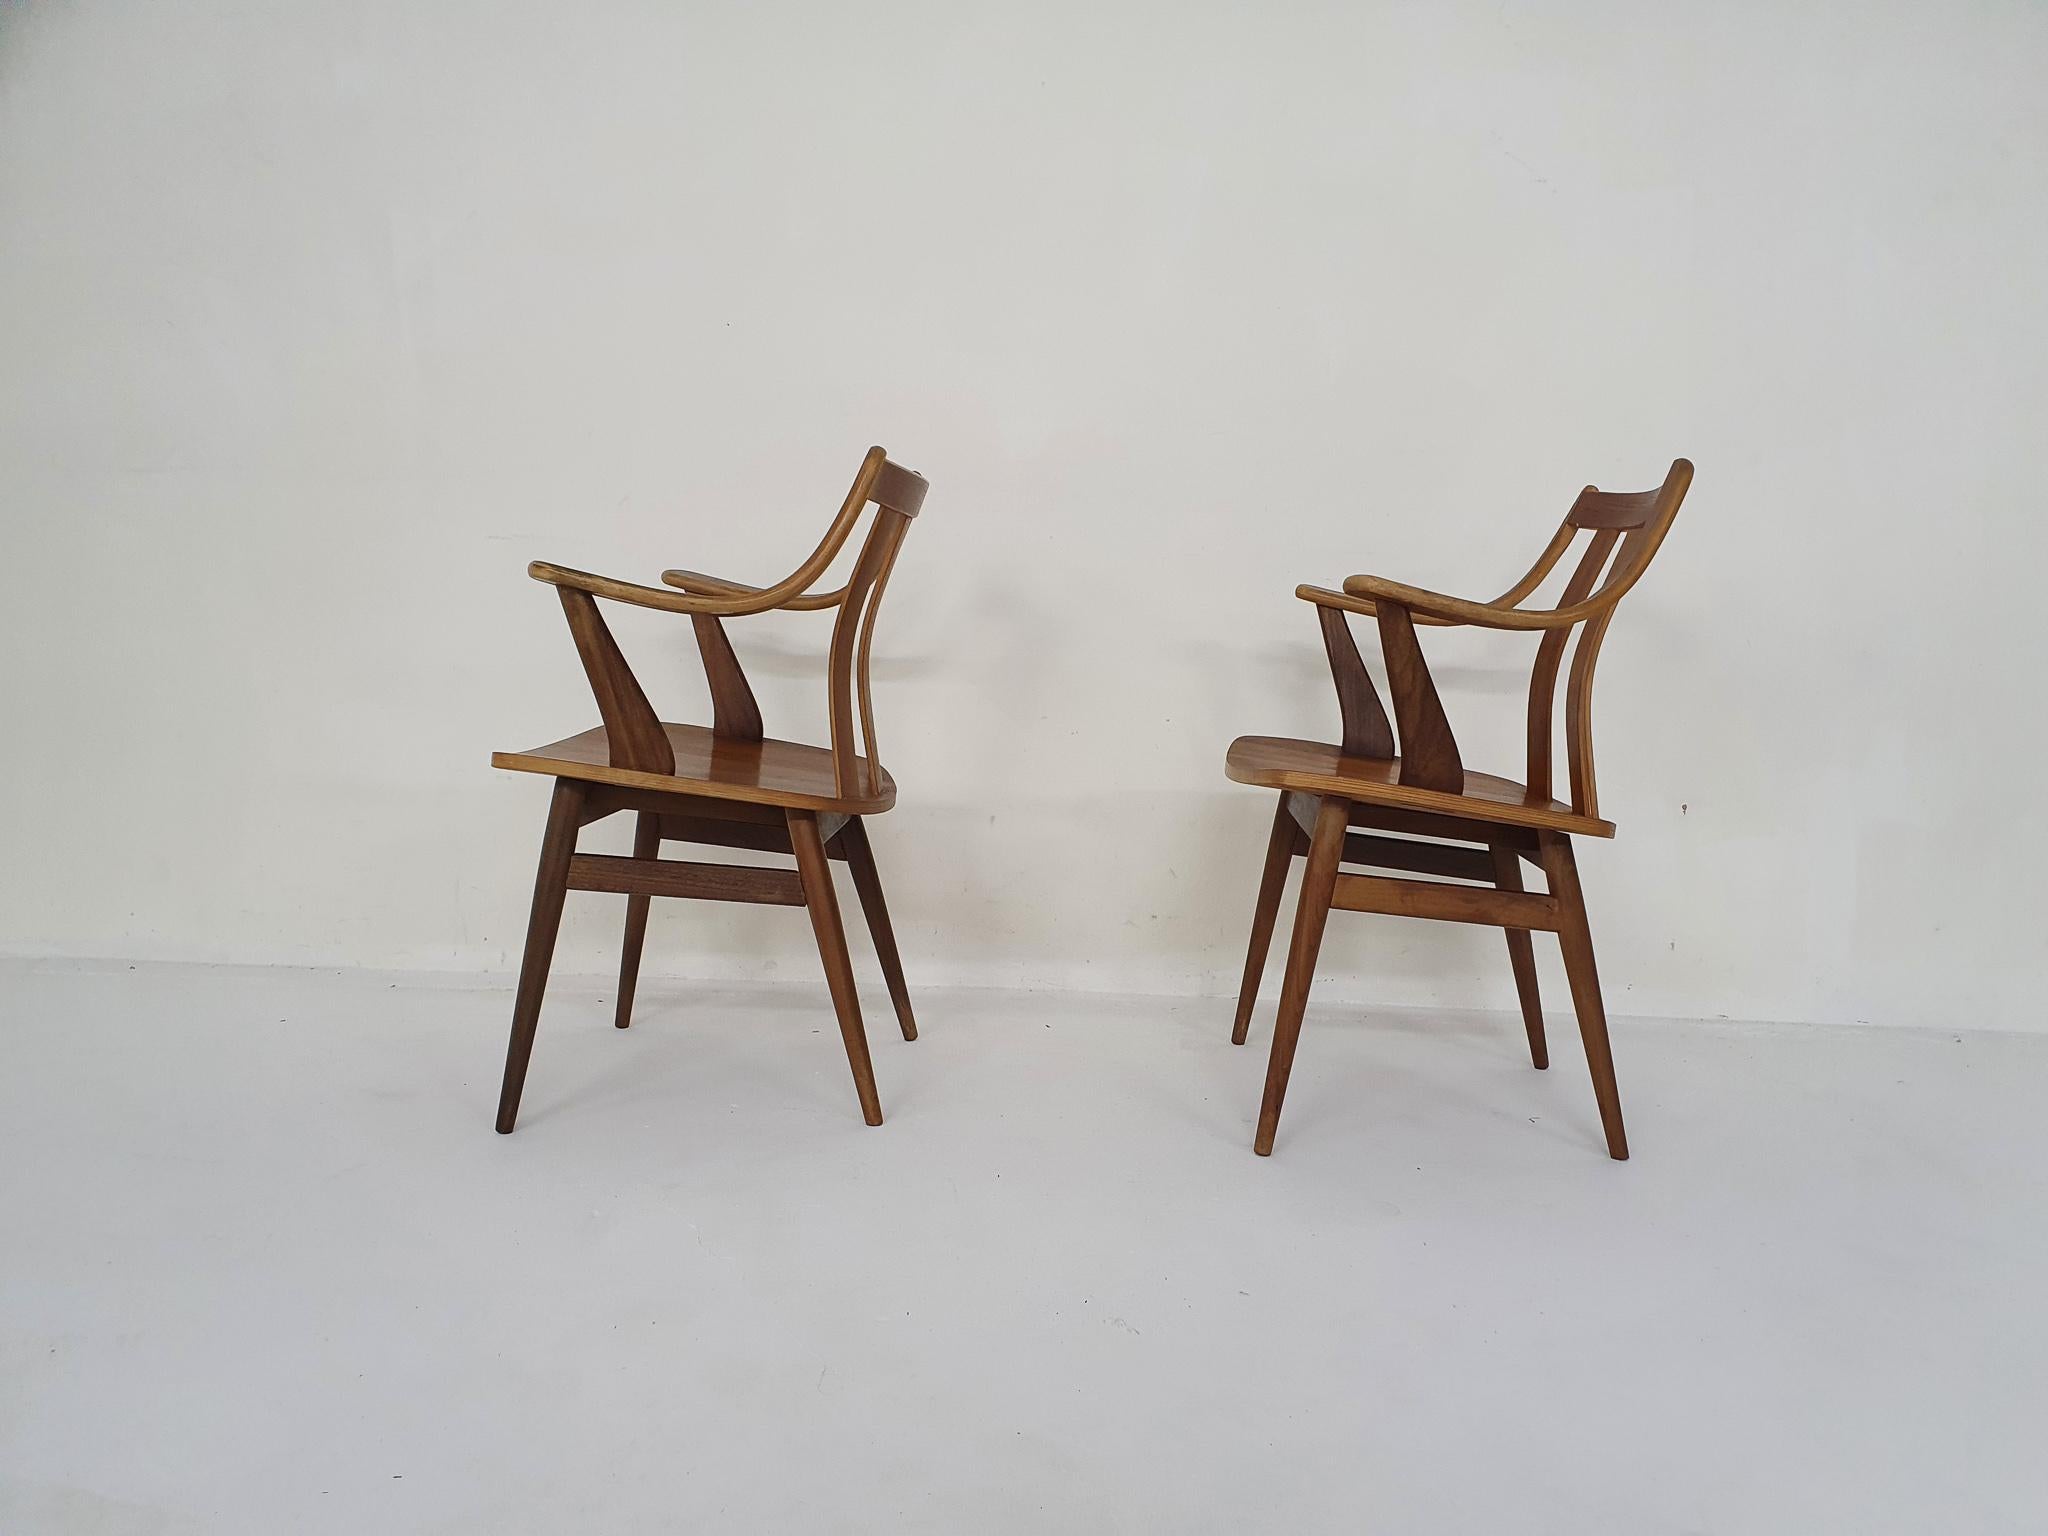 Scandinavian Modern Set of Two Teak Arm Chairs, the Netherlands 1960's For Sale